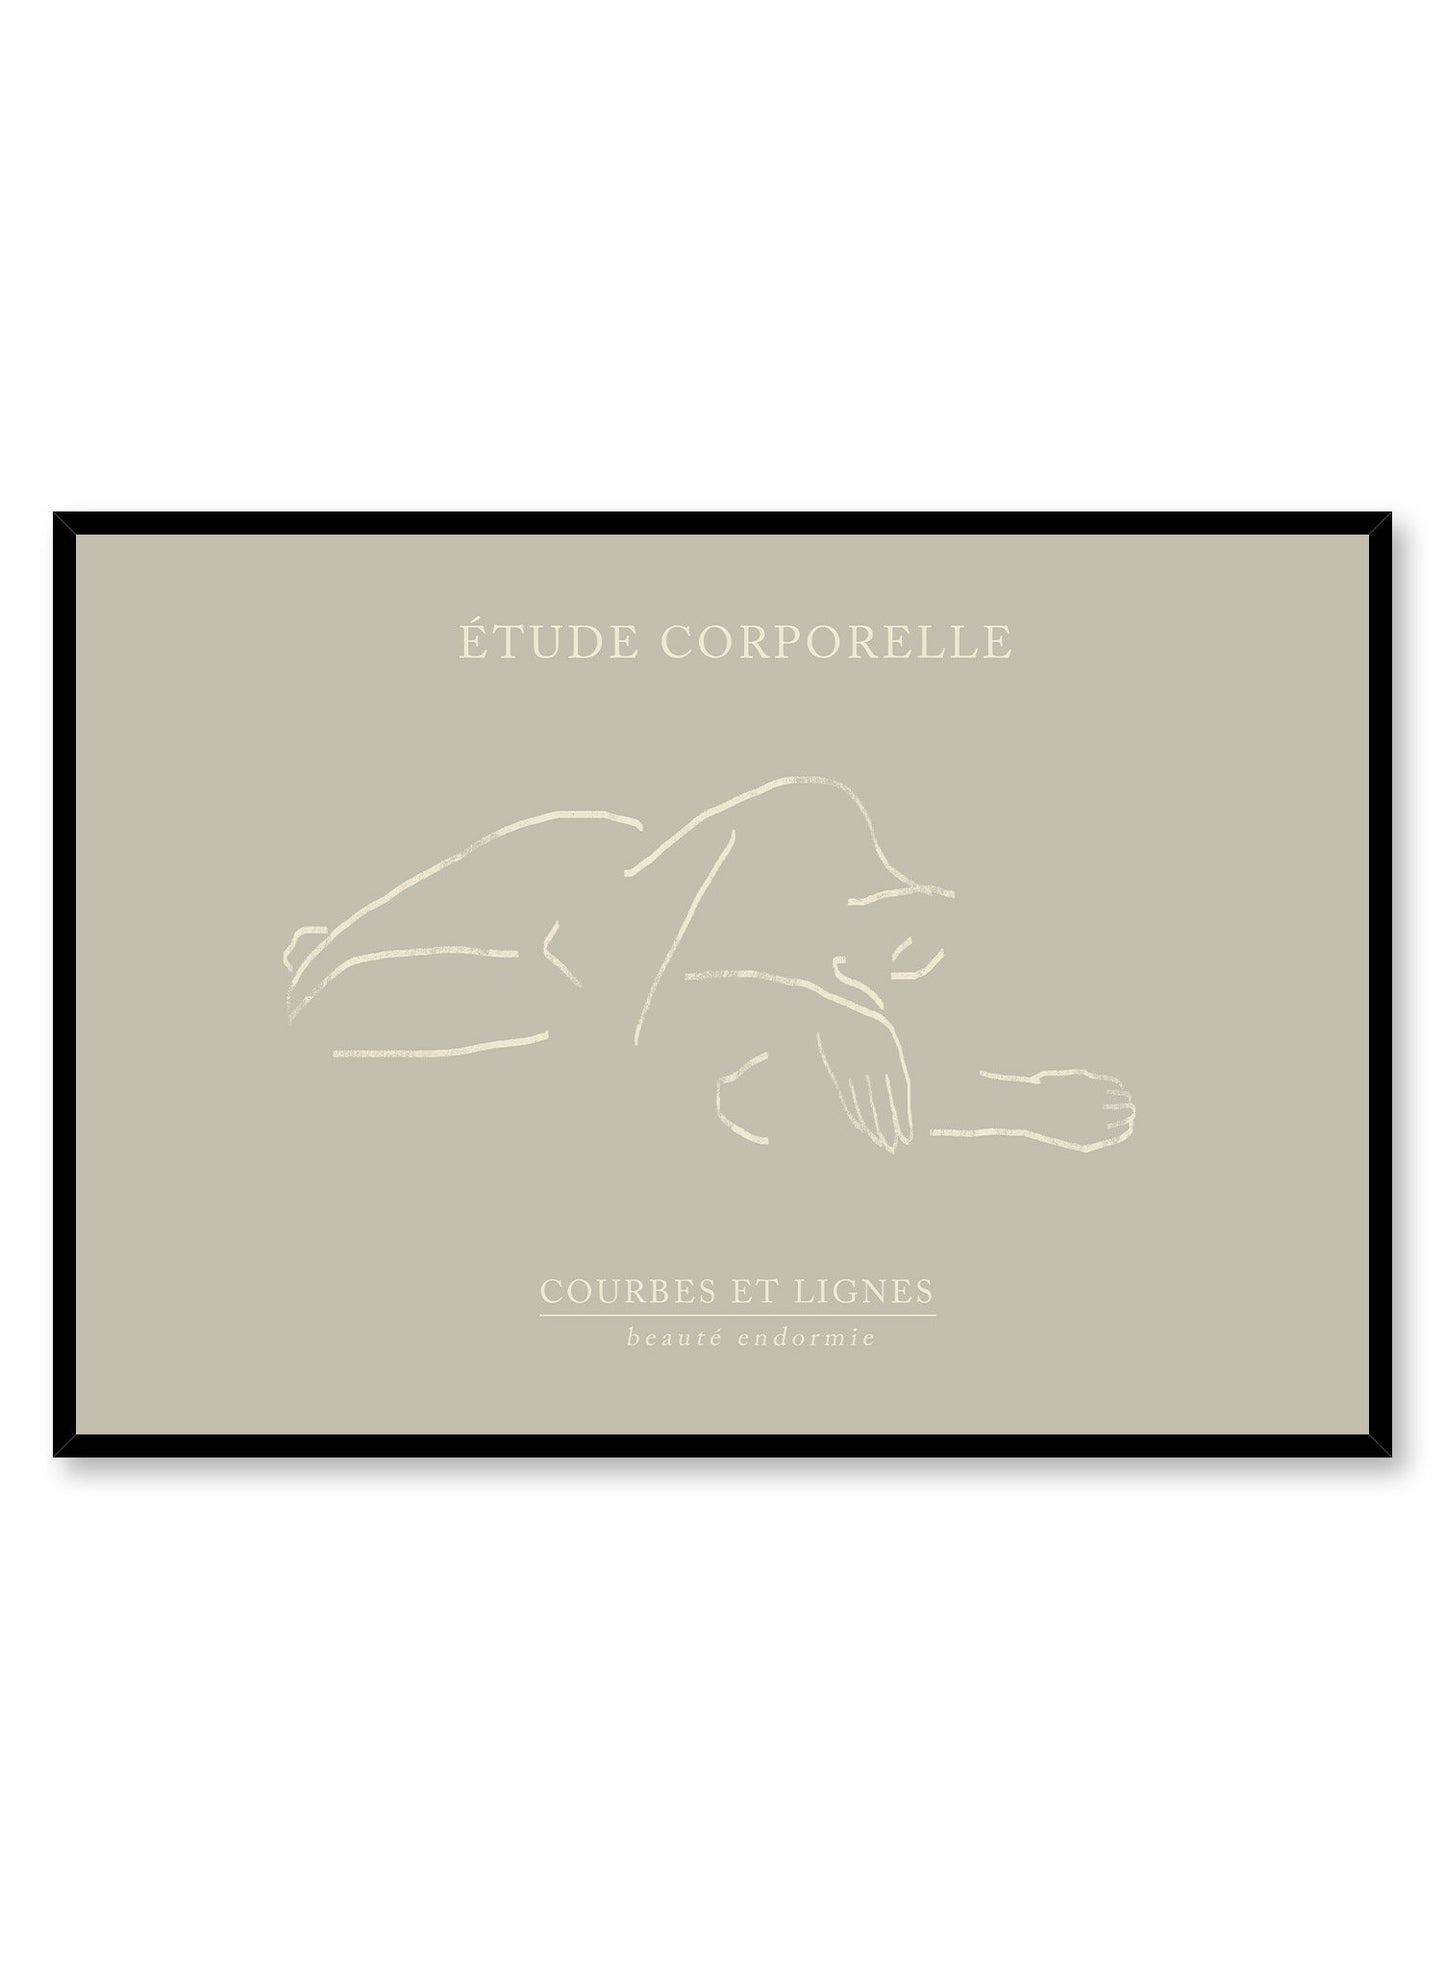 Inward is a line art illustration of the silhouette of a woman sleeping by Opposite Wall.